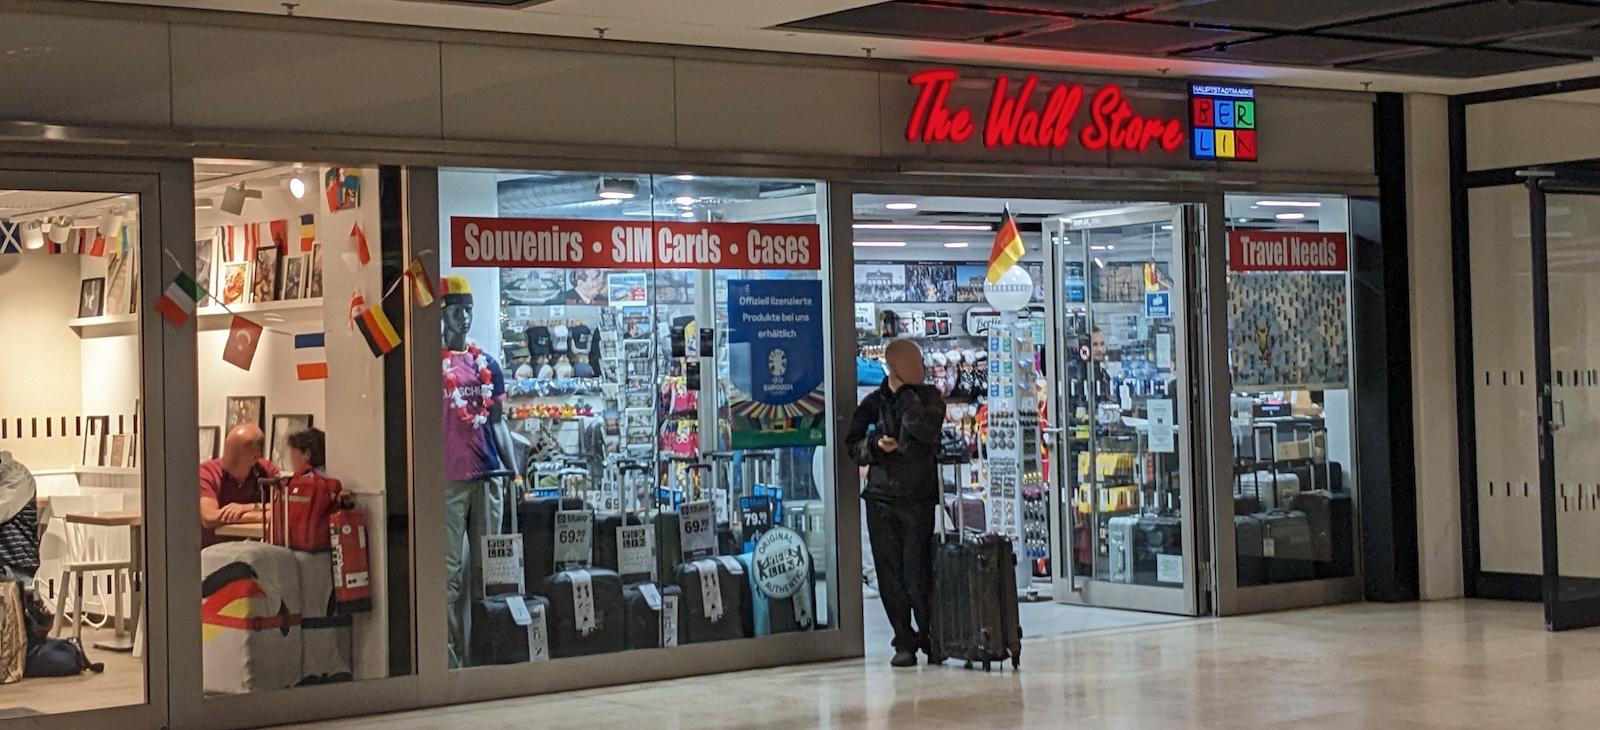 The Wall Store at Berlin airport